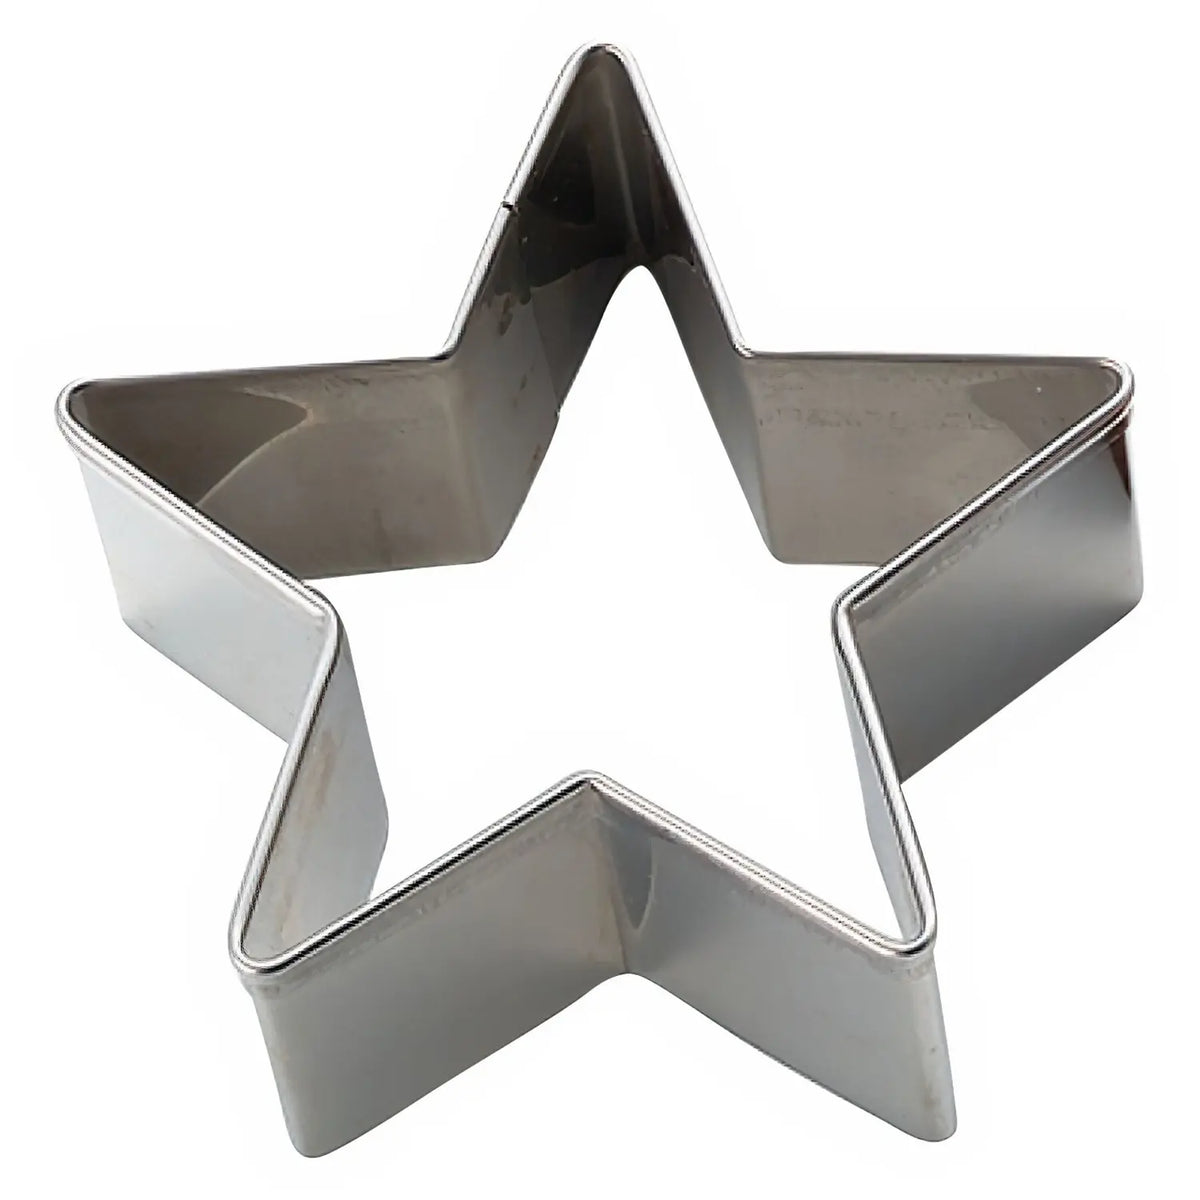 TIGERCROWN Cake Land Stainless Steel Cookie Cutter Star